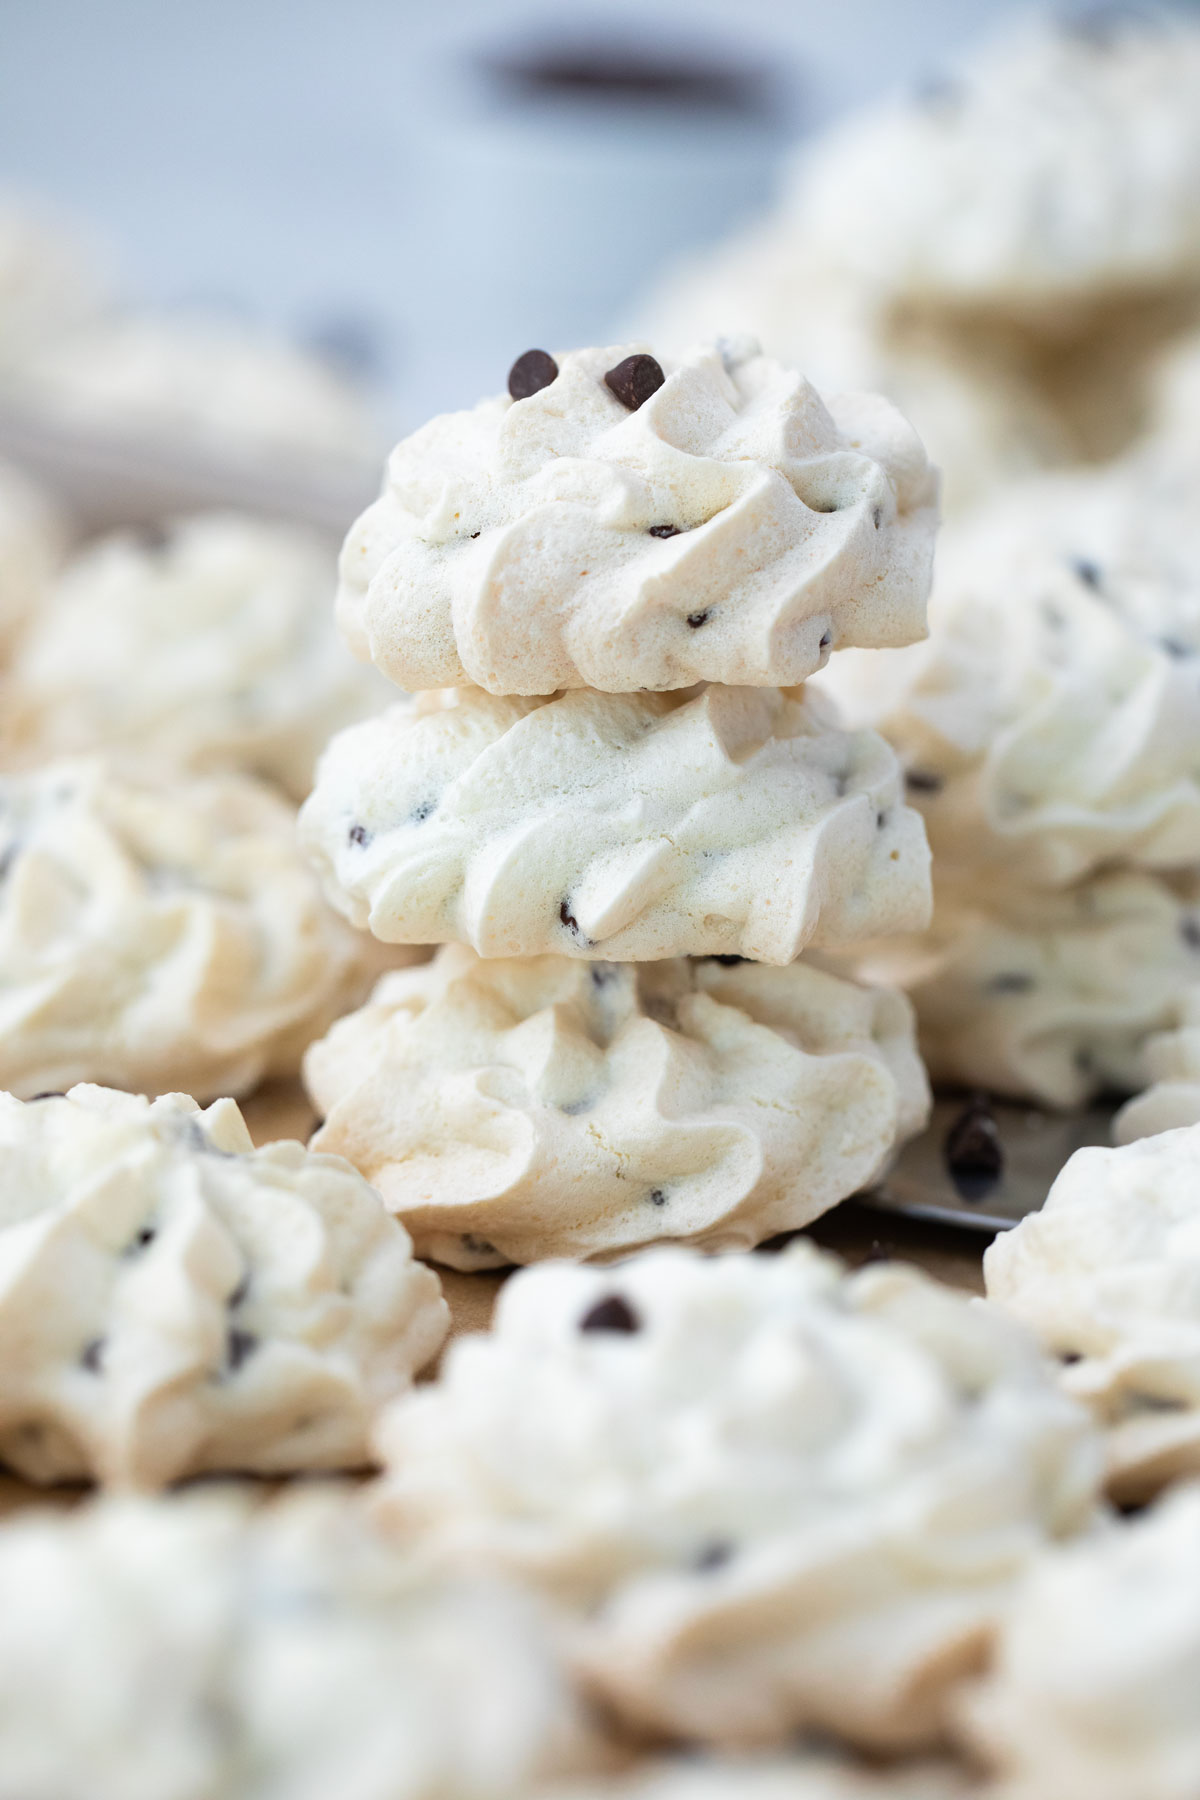 A stack of meringue cookies with chocolate chips.